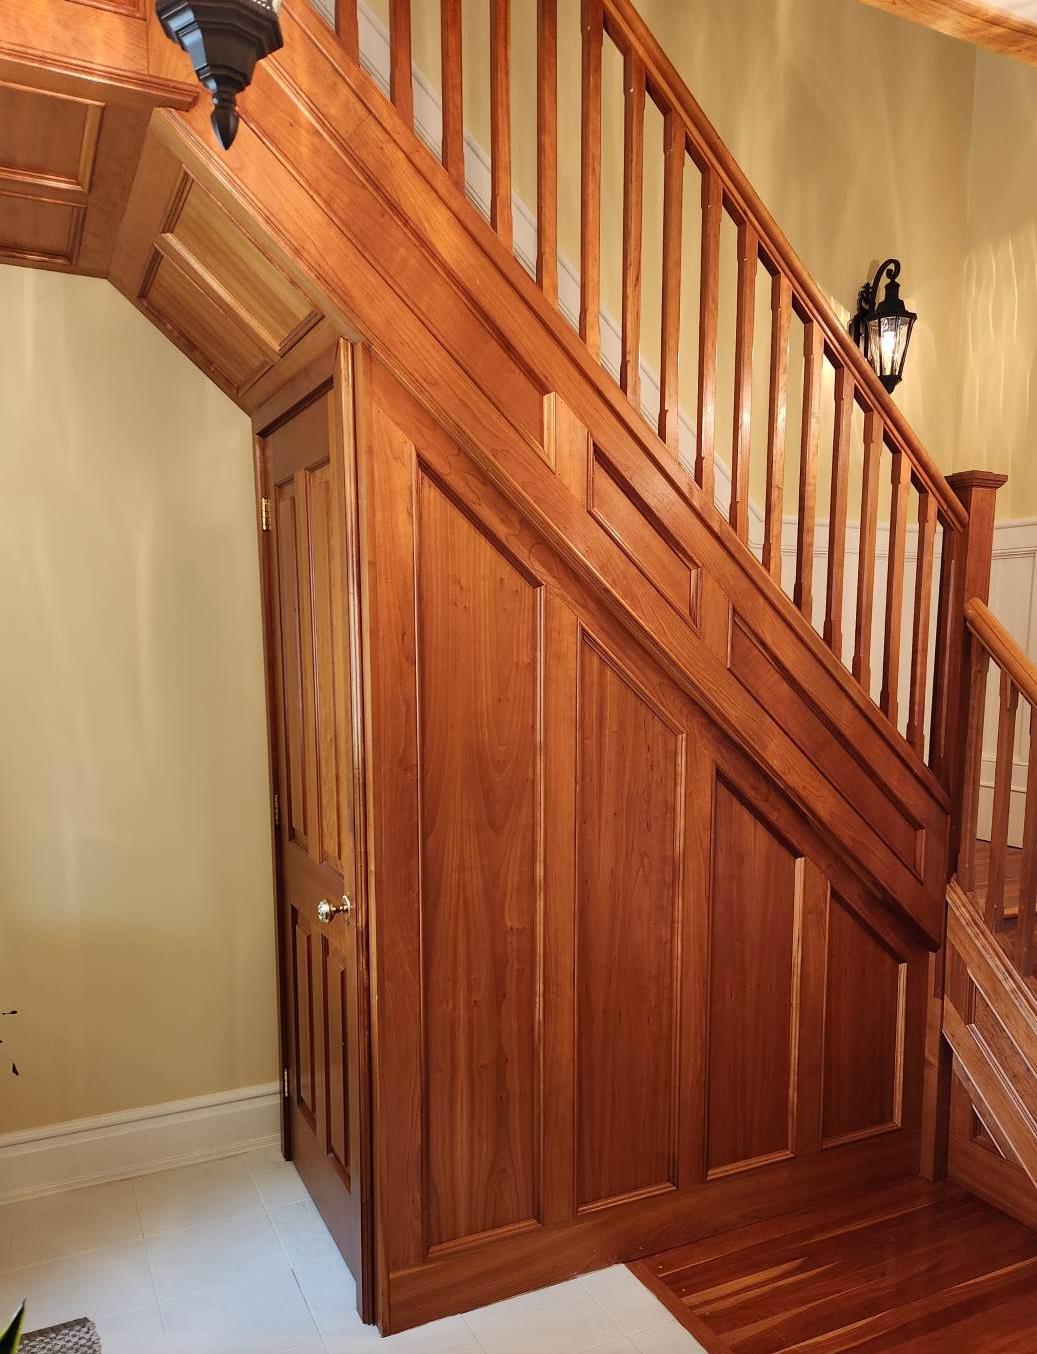 Stained Edwardian staircase and panelling